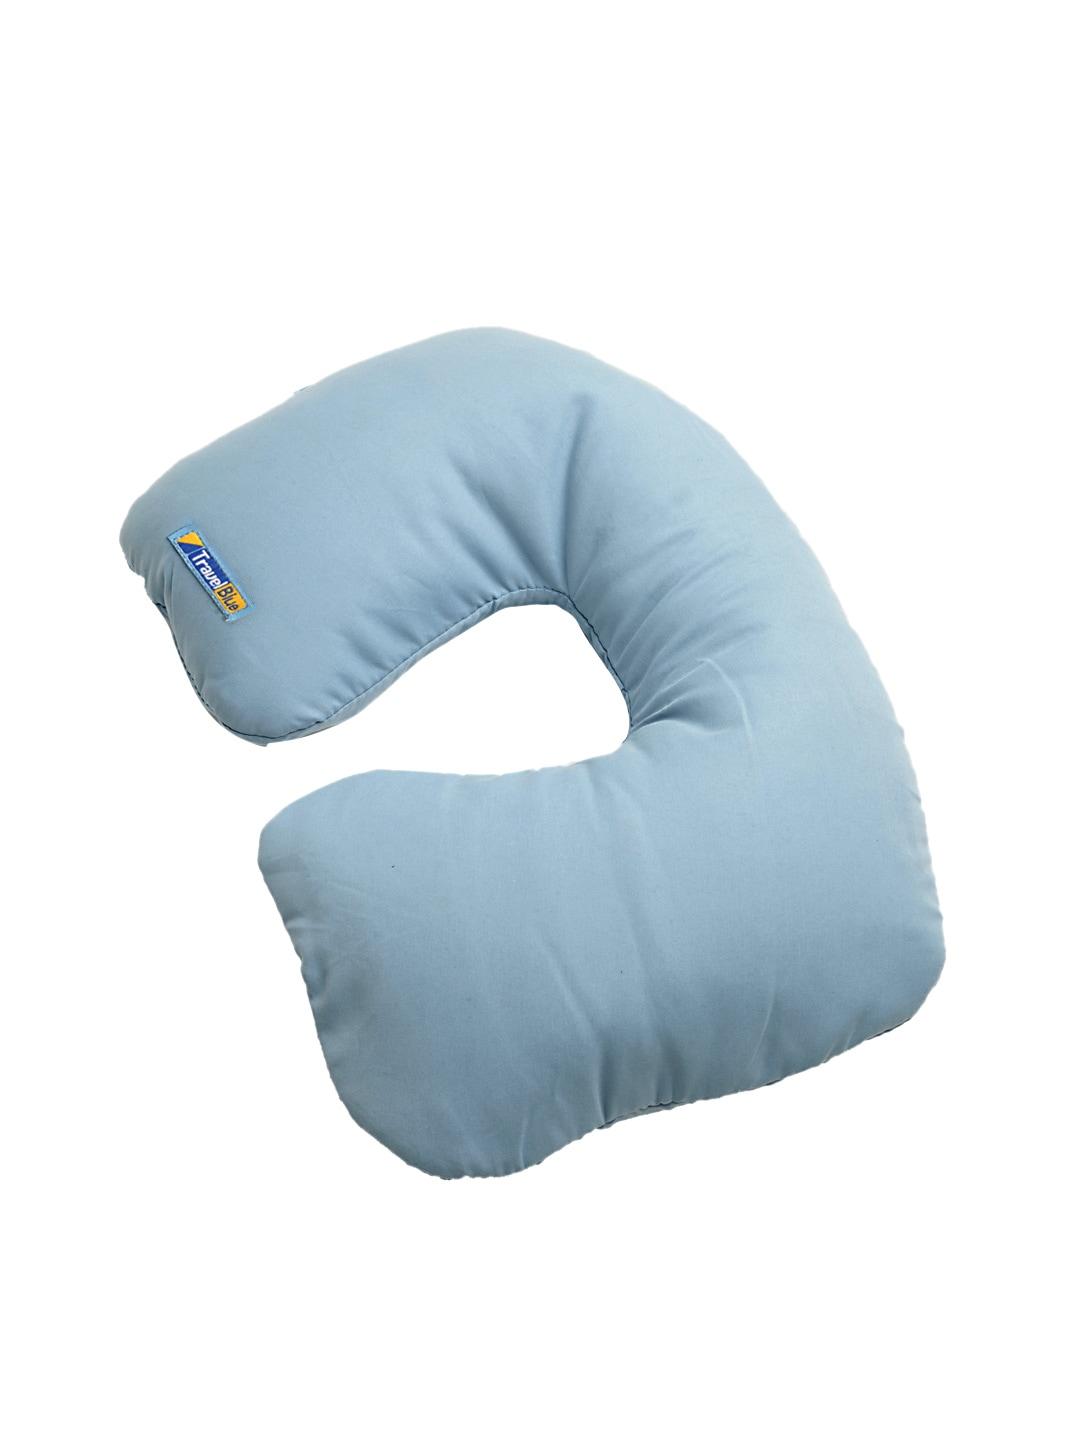 travel blue unisex inflatable travel pillow